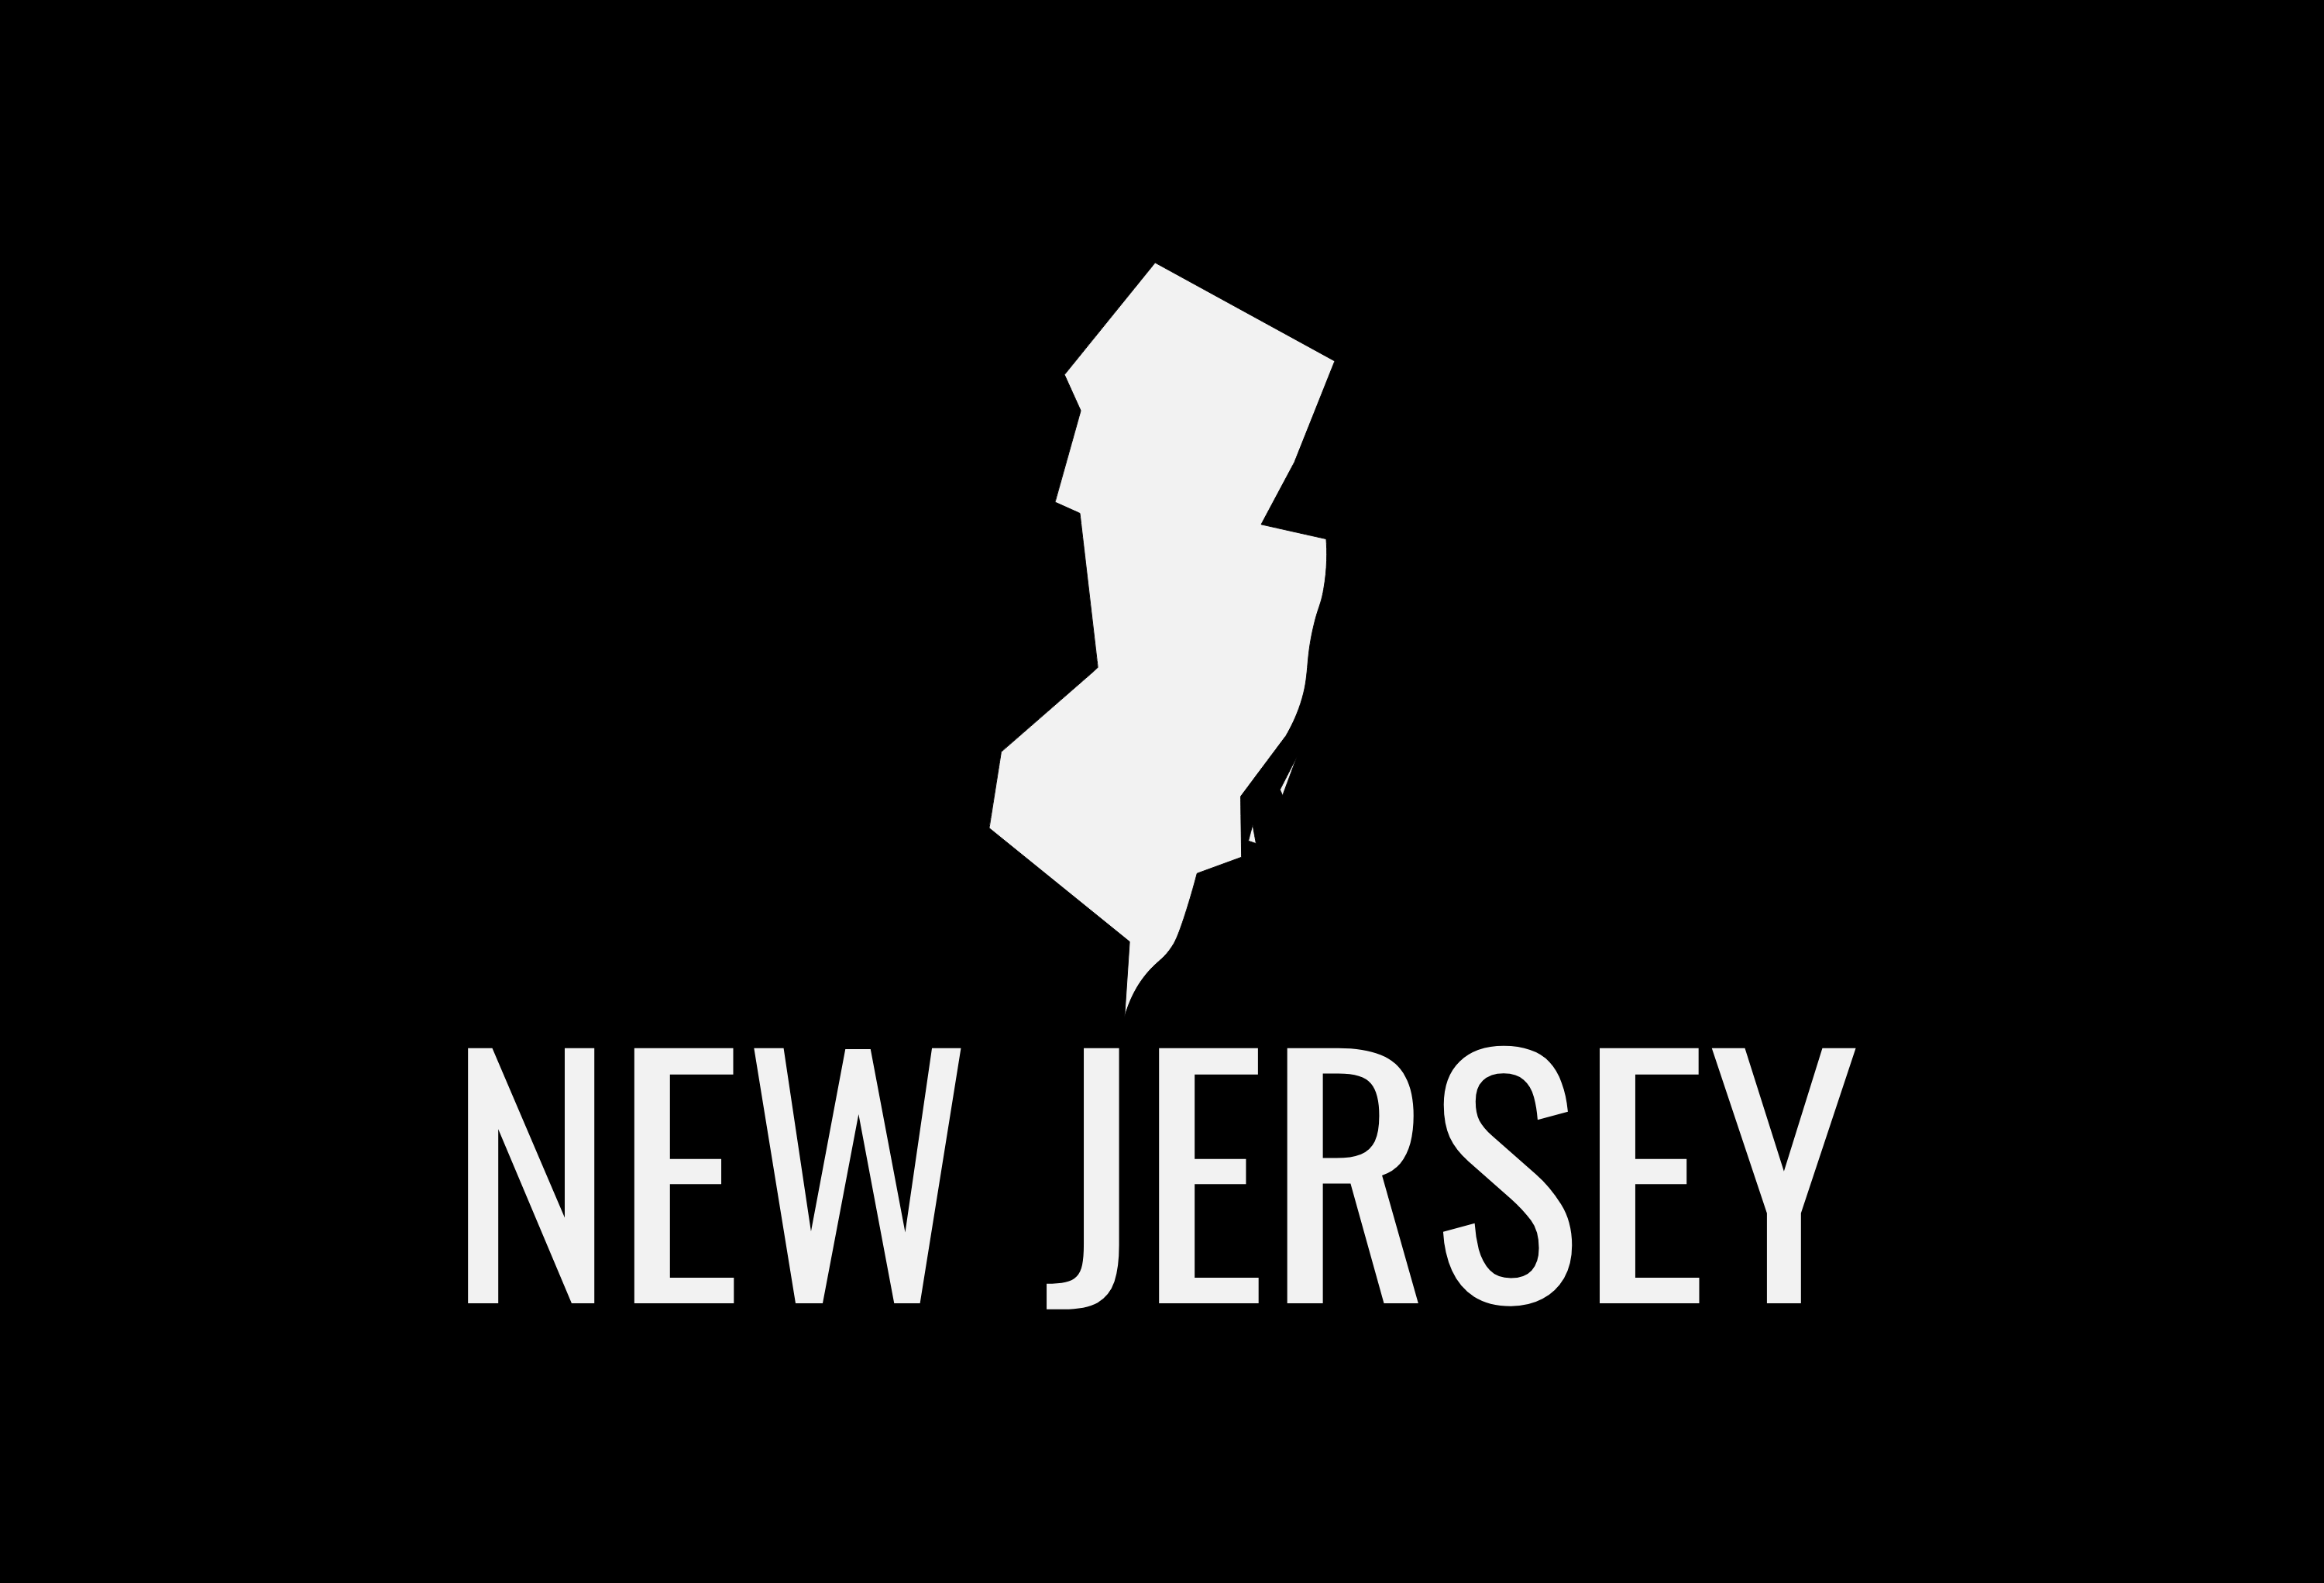 New Jersey State Map Car Decal - Permanent Vinyl Sticker for Cars, Vehicle, Doors, Windows, Laptop, and more!